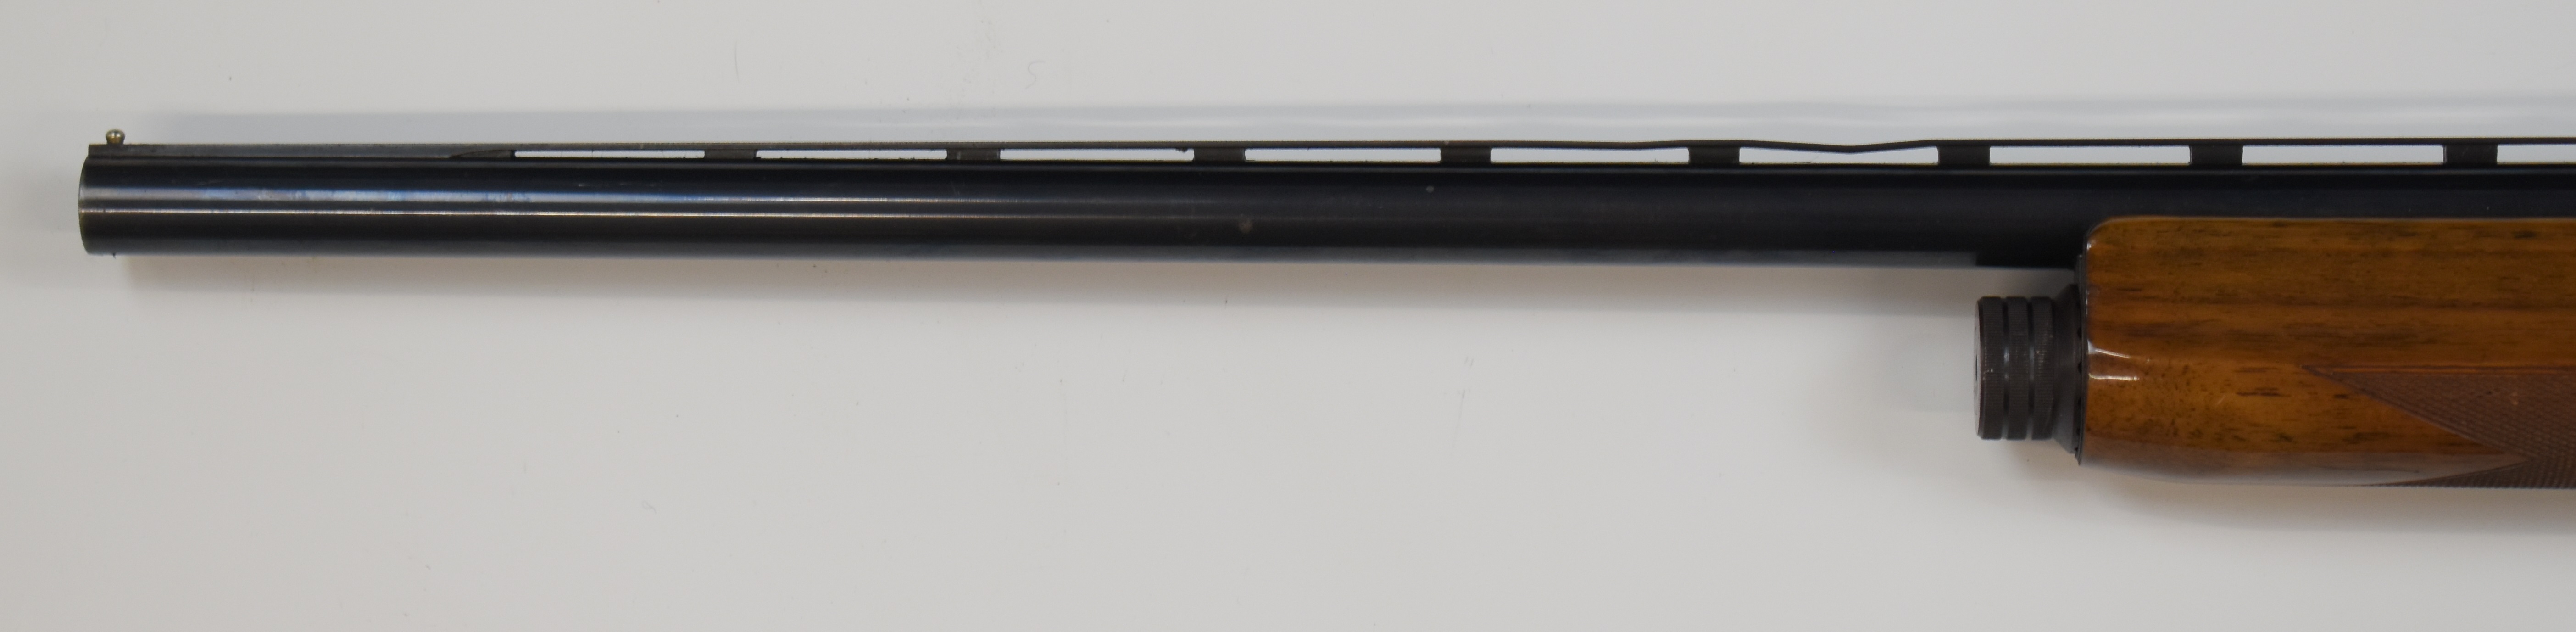 Browning 2000 12 bore 3-shot semi-automatic shotgun with named and engraved lock, chequered semi- - Image 11 of 11